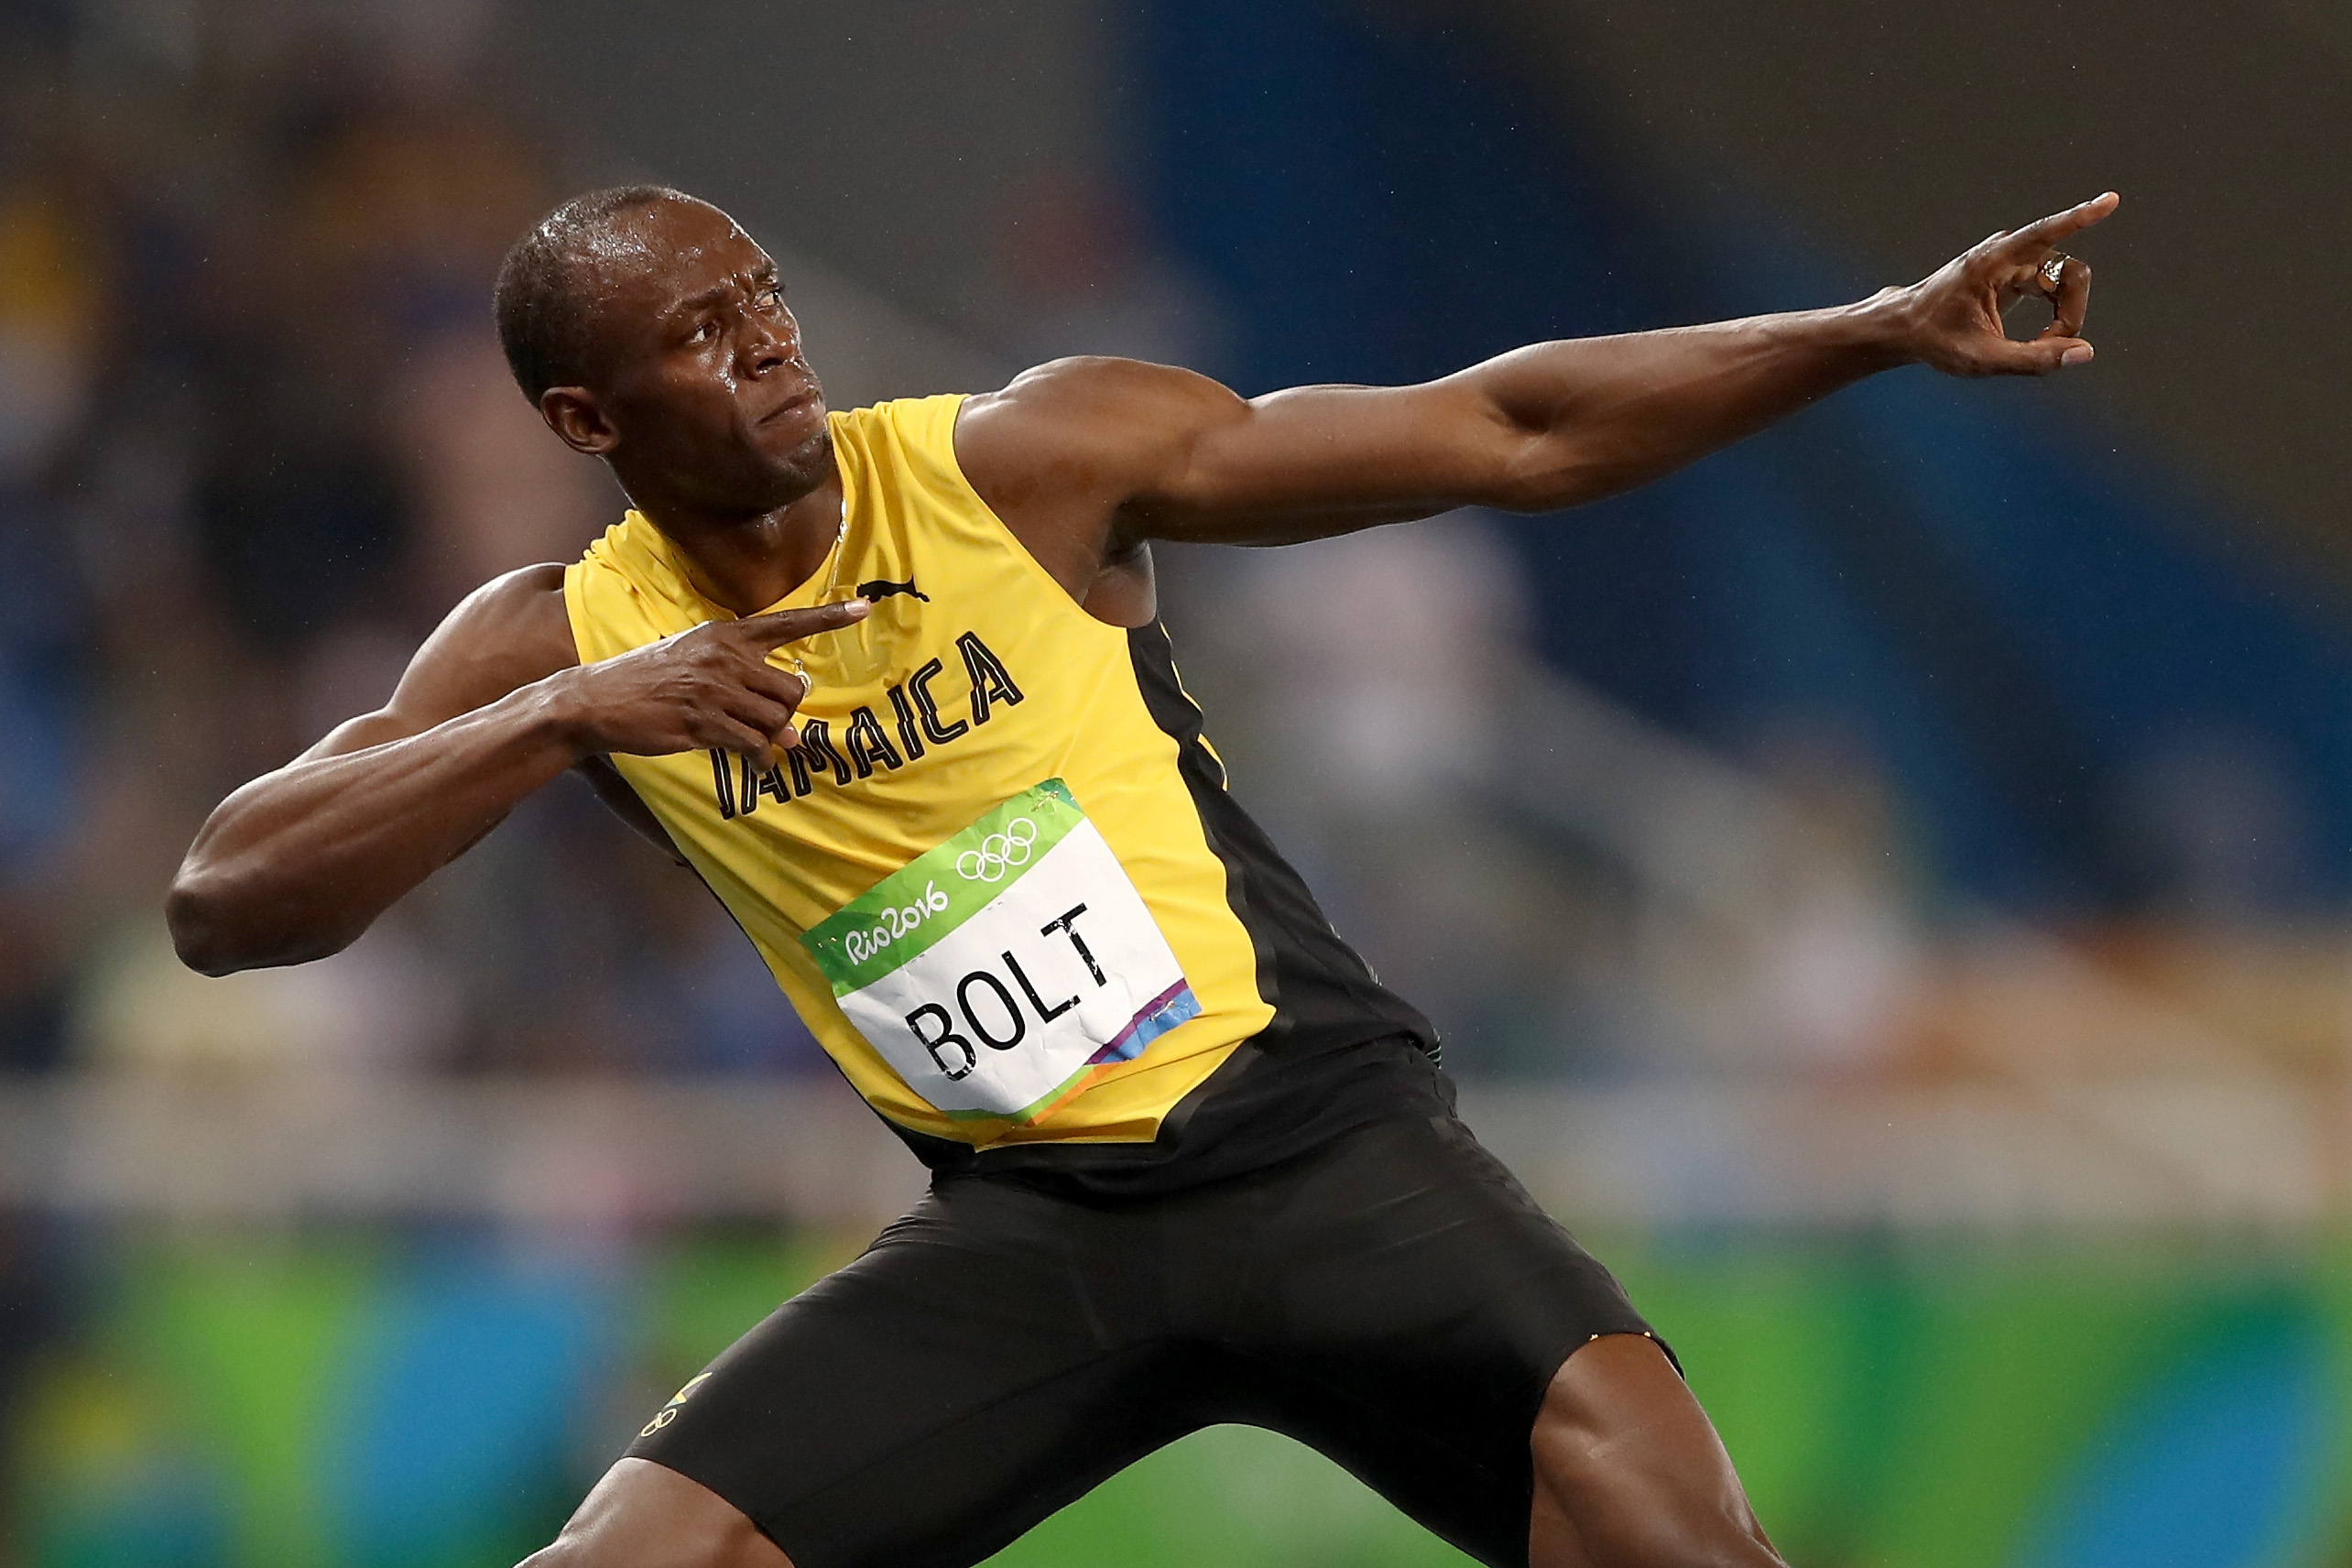 Usain Bolt Files for Trademarks to Protect His Victory Pose BCAPiTAL